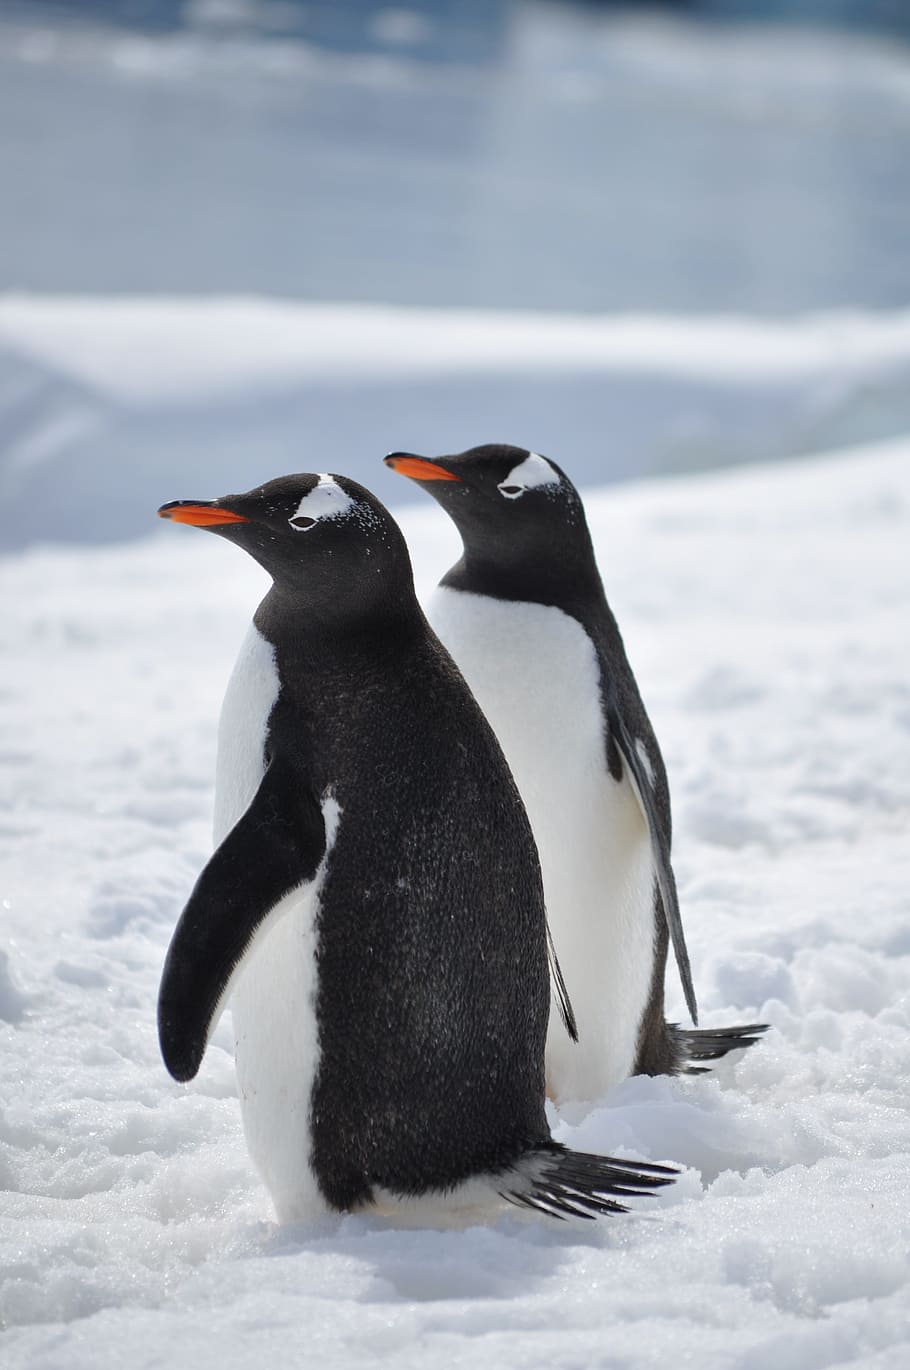 two penguins on ice, antarctica, bird, south, snow, gentoo, cold